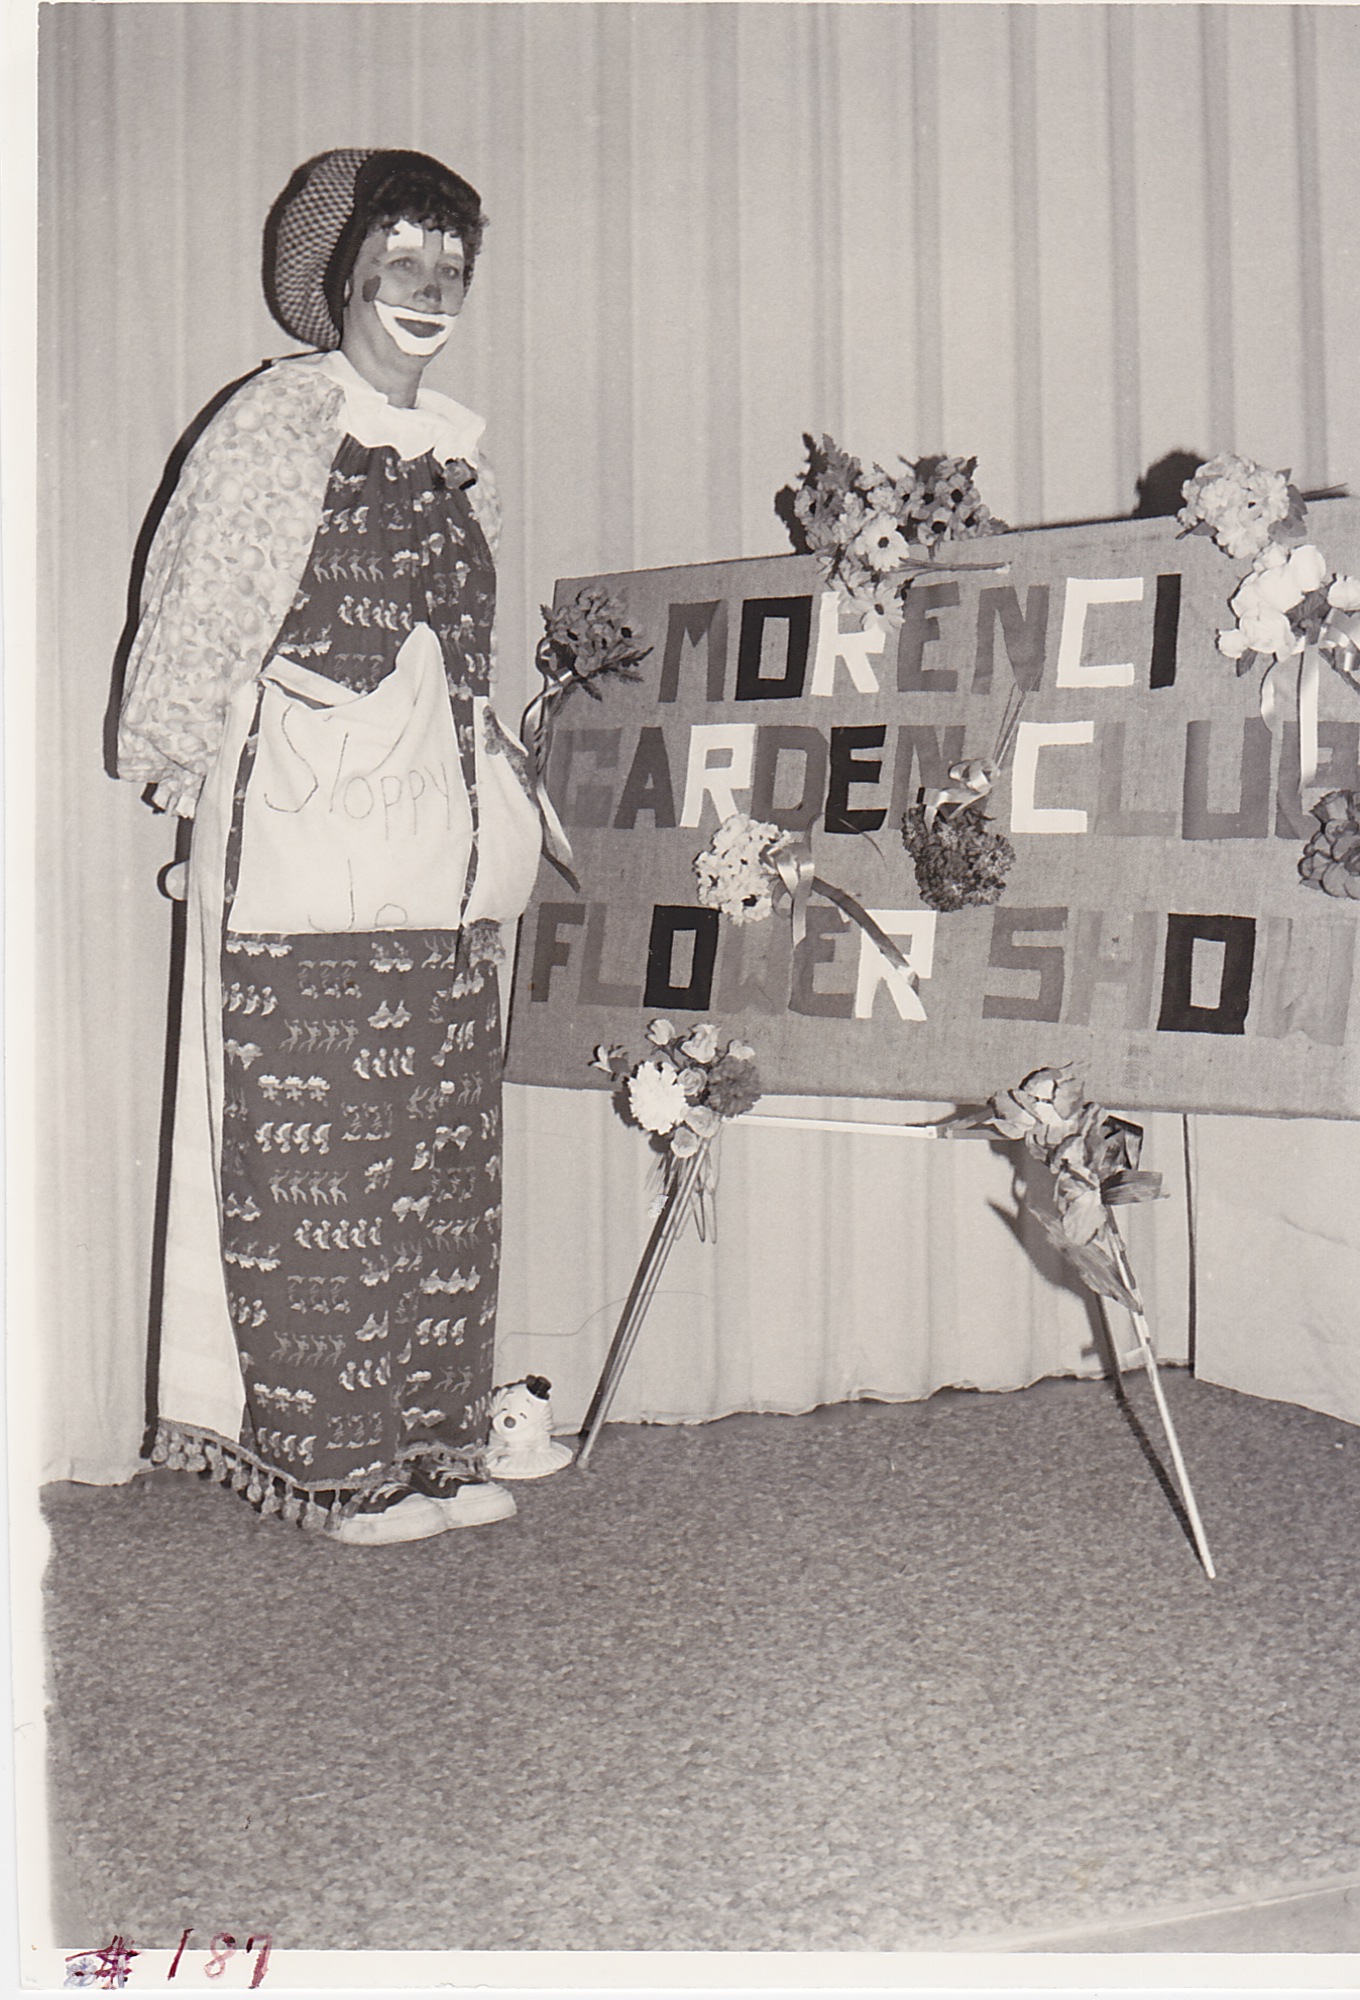 Dressed in one of her many clown makeups, Joyce Woerner, a member of the Morenci Garden Club, pays a visit to the club’s flower show during Festival Days of 1980.